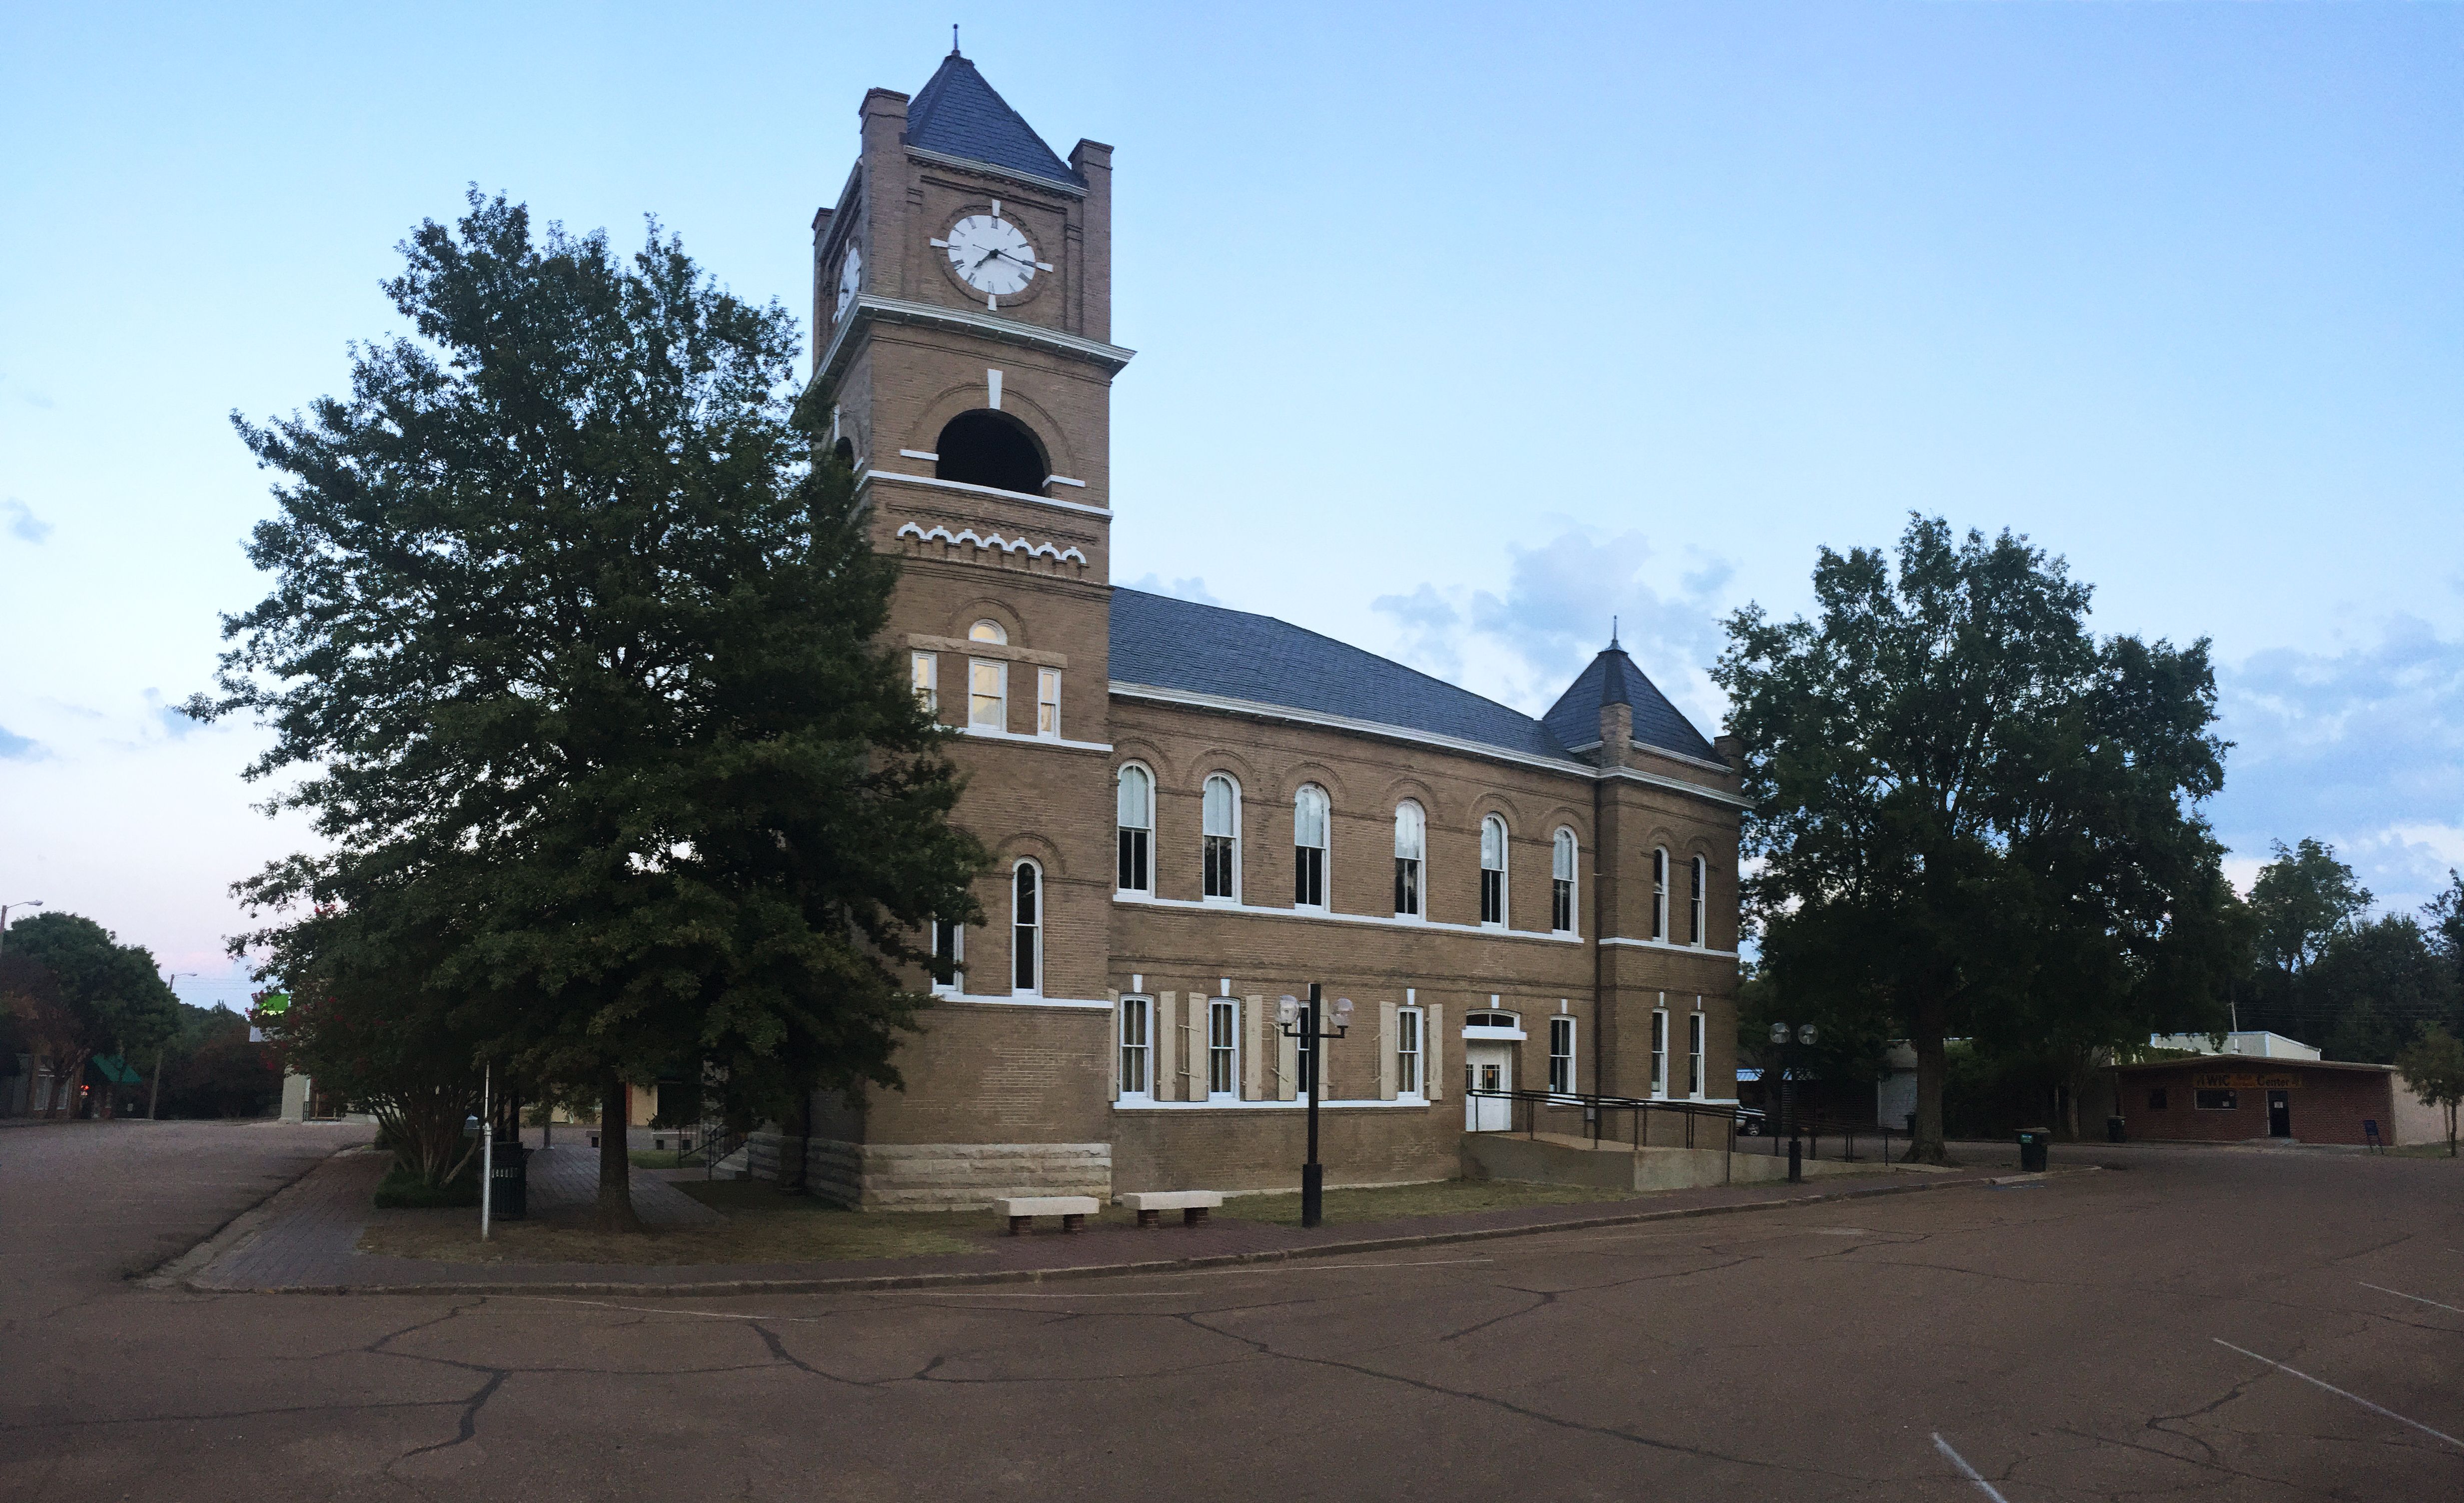 An exterior of the restored Tallahatchie County Courthouse, where the trial of the two men accused of killing Emmett Till was held in Sumner, Mississippi..